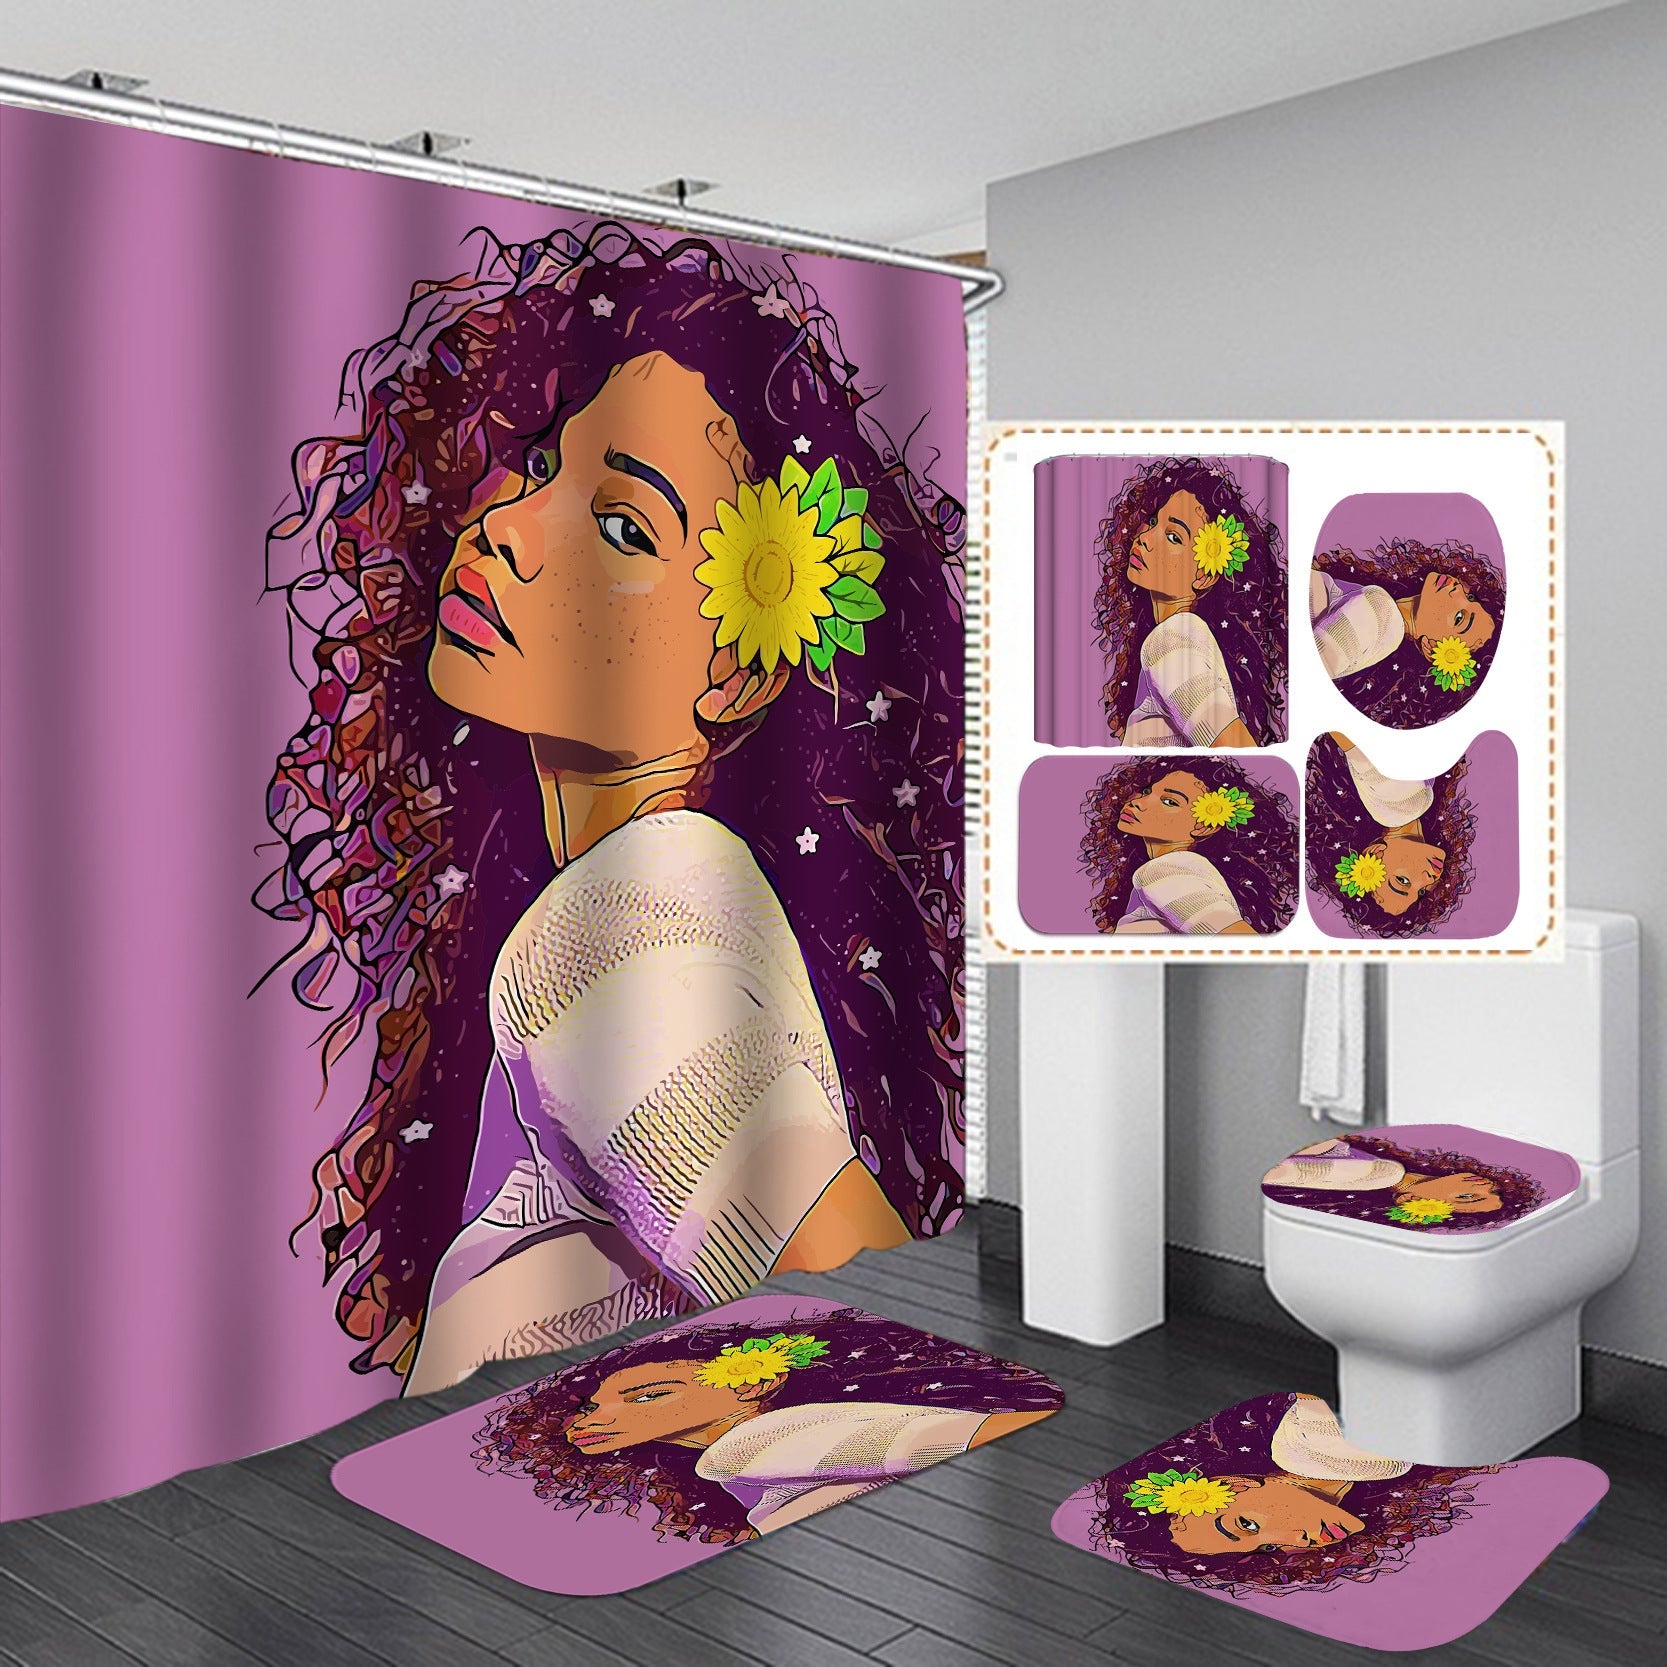 Beautiful Girl Design Shower Curtain Bathroom SetsNon-Slip Toilet Lid Cover-Shower Curtain-180×180cm Shower Curtain Only-6-Free Shipping at meselling99